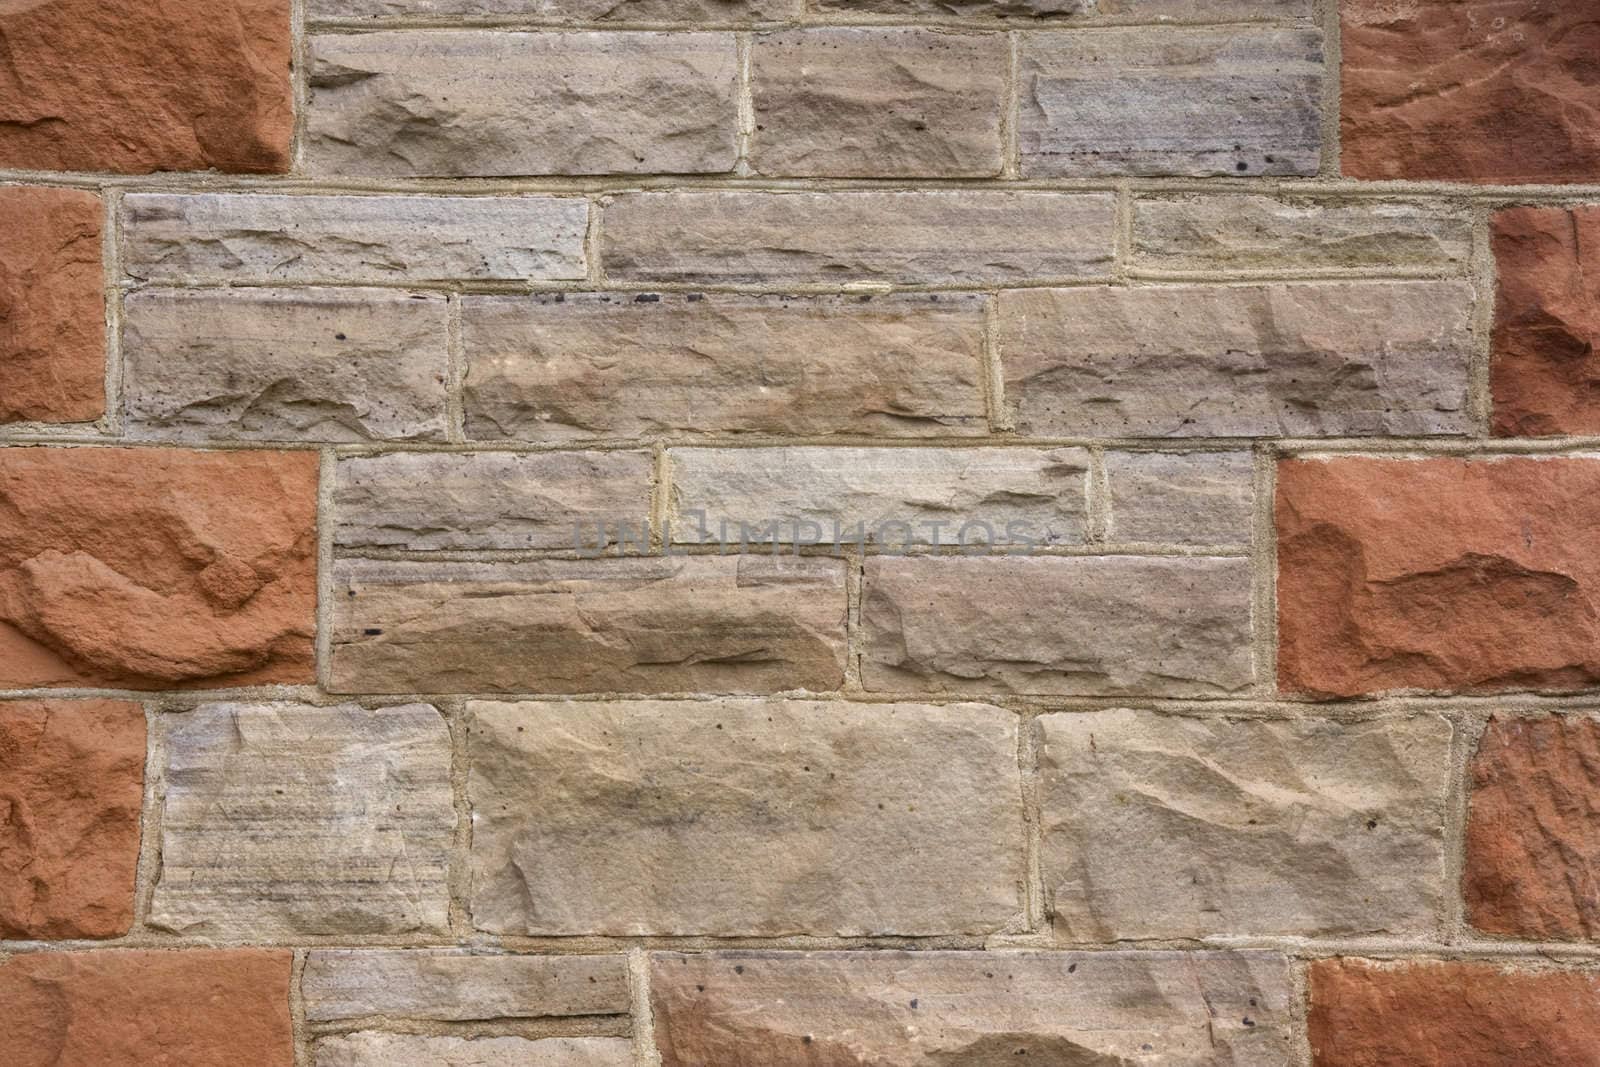 gray and red sandstone wall by PixelsAway